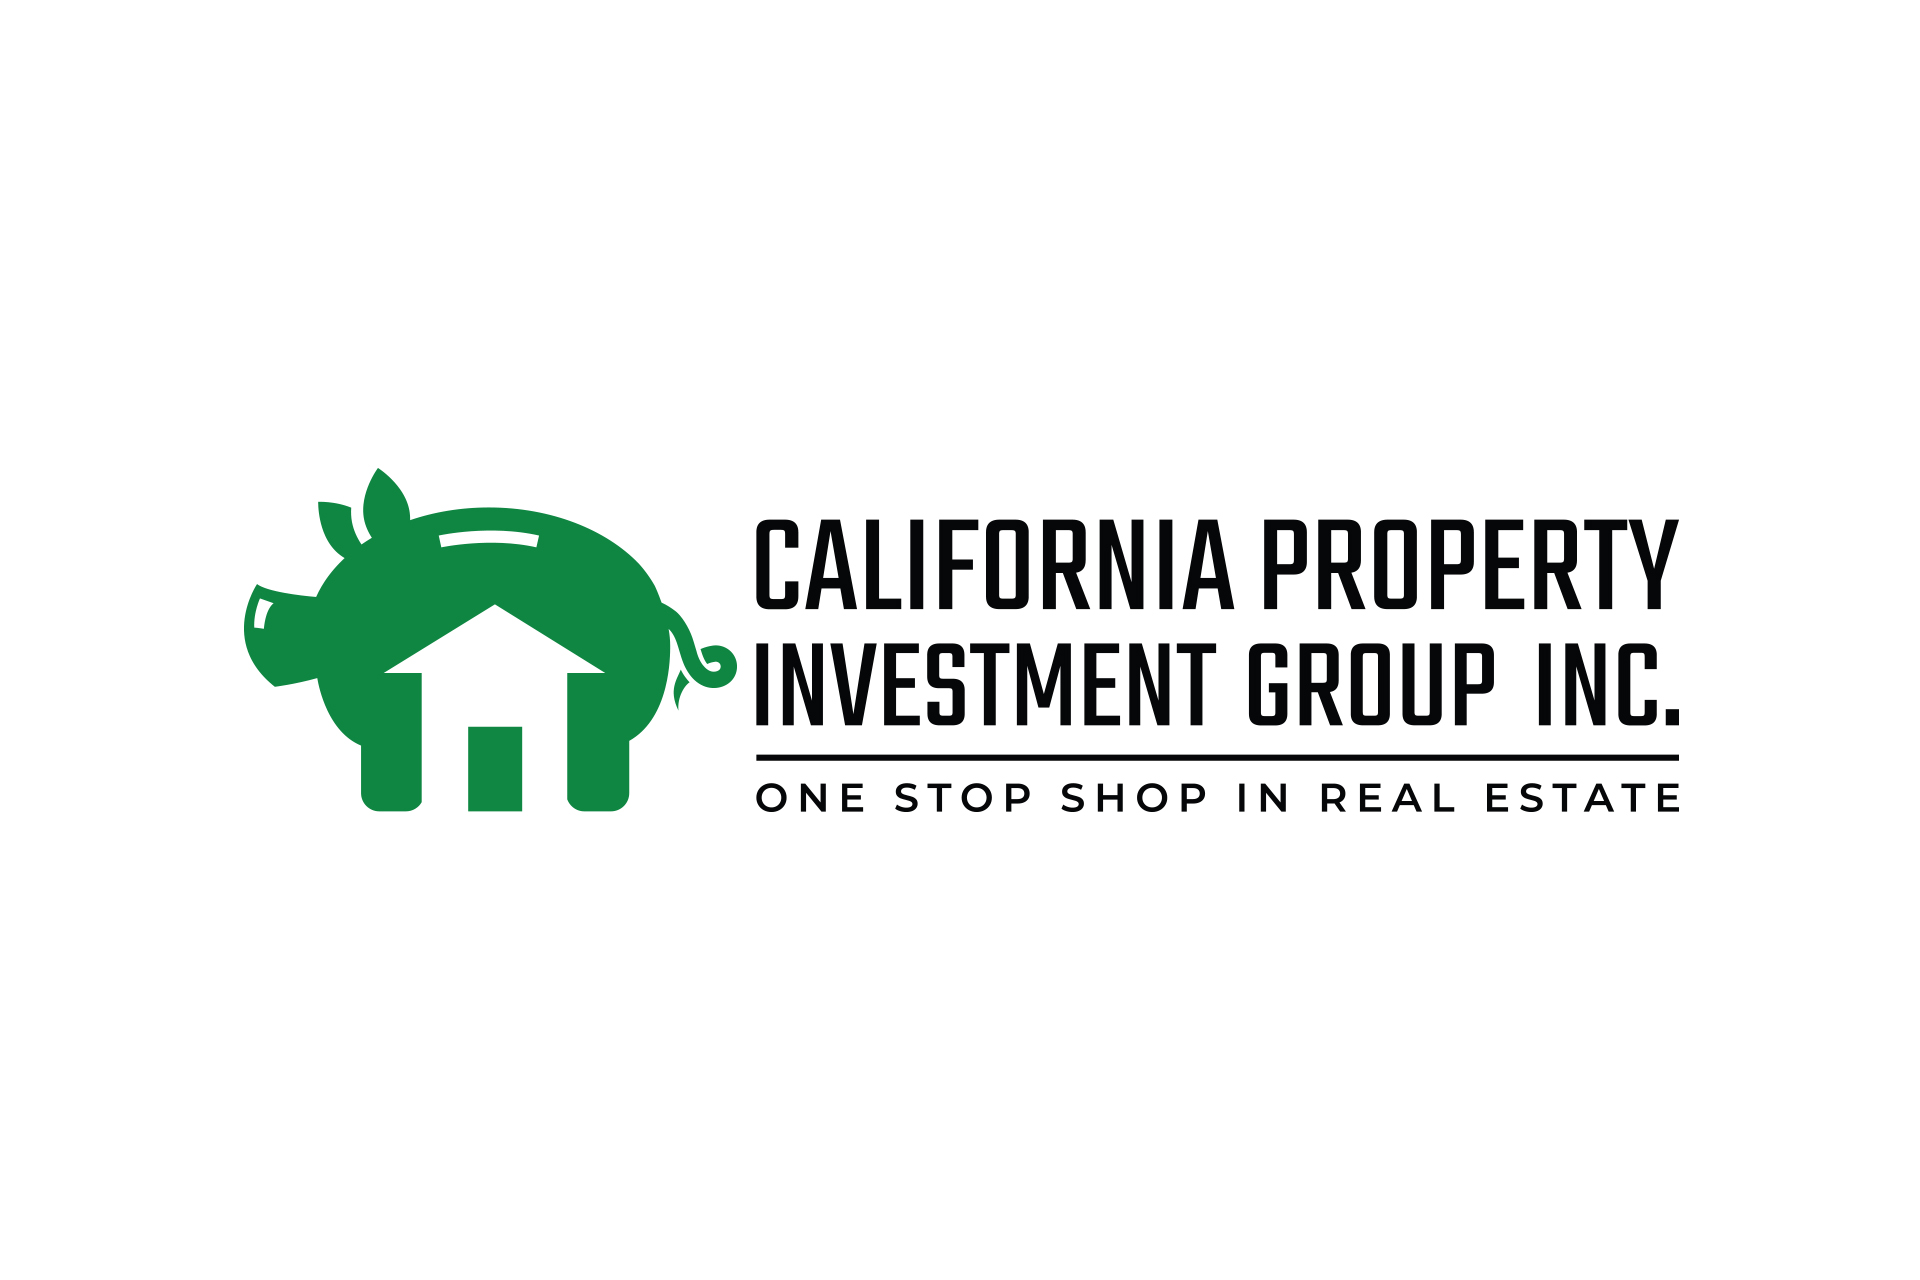 California Property Investment Group Inc